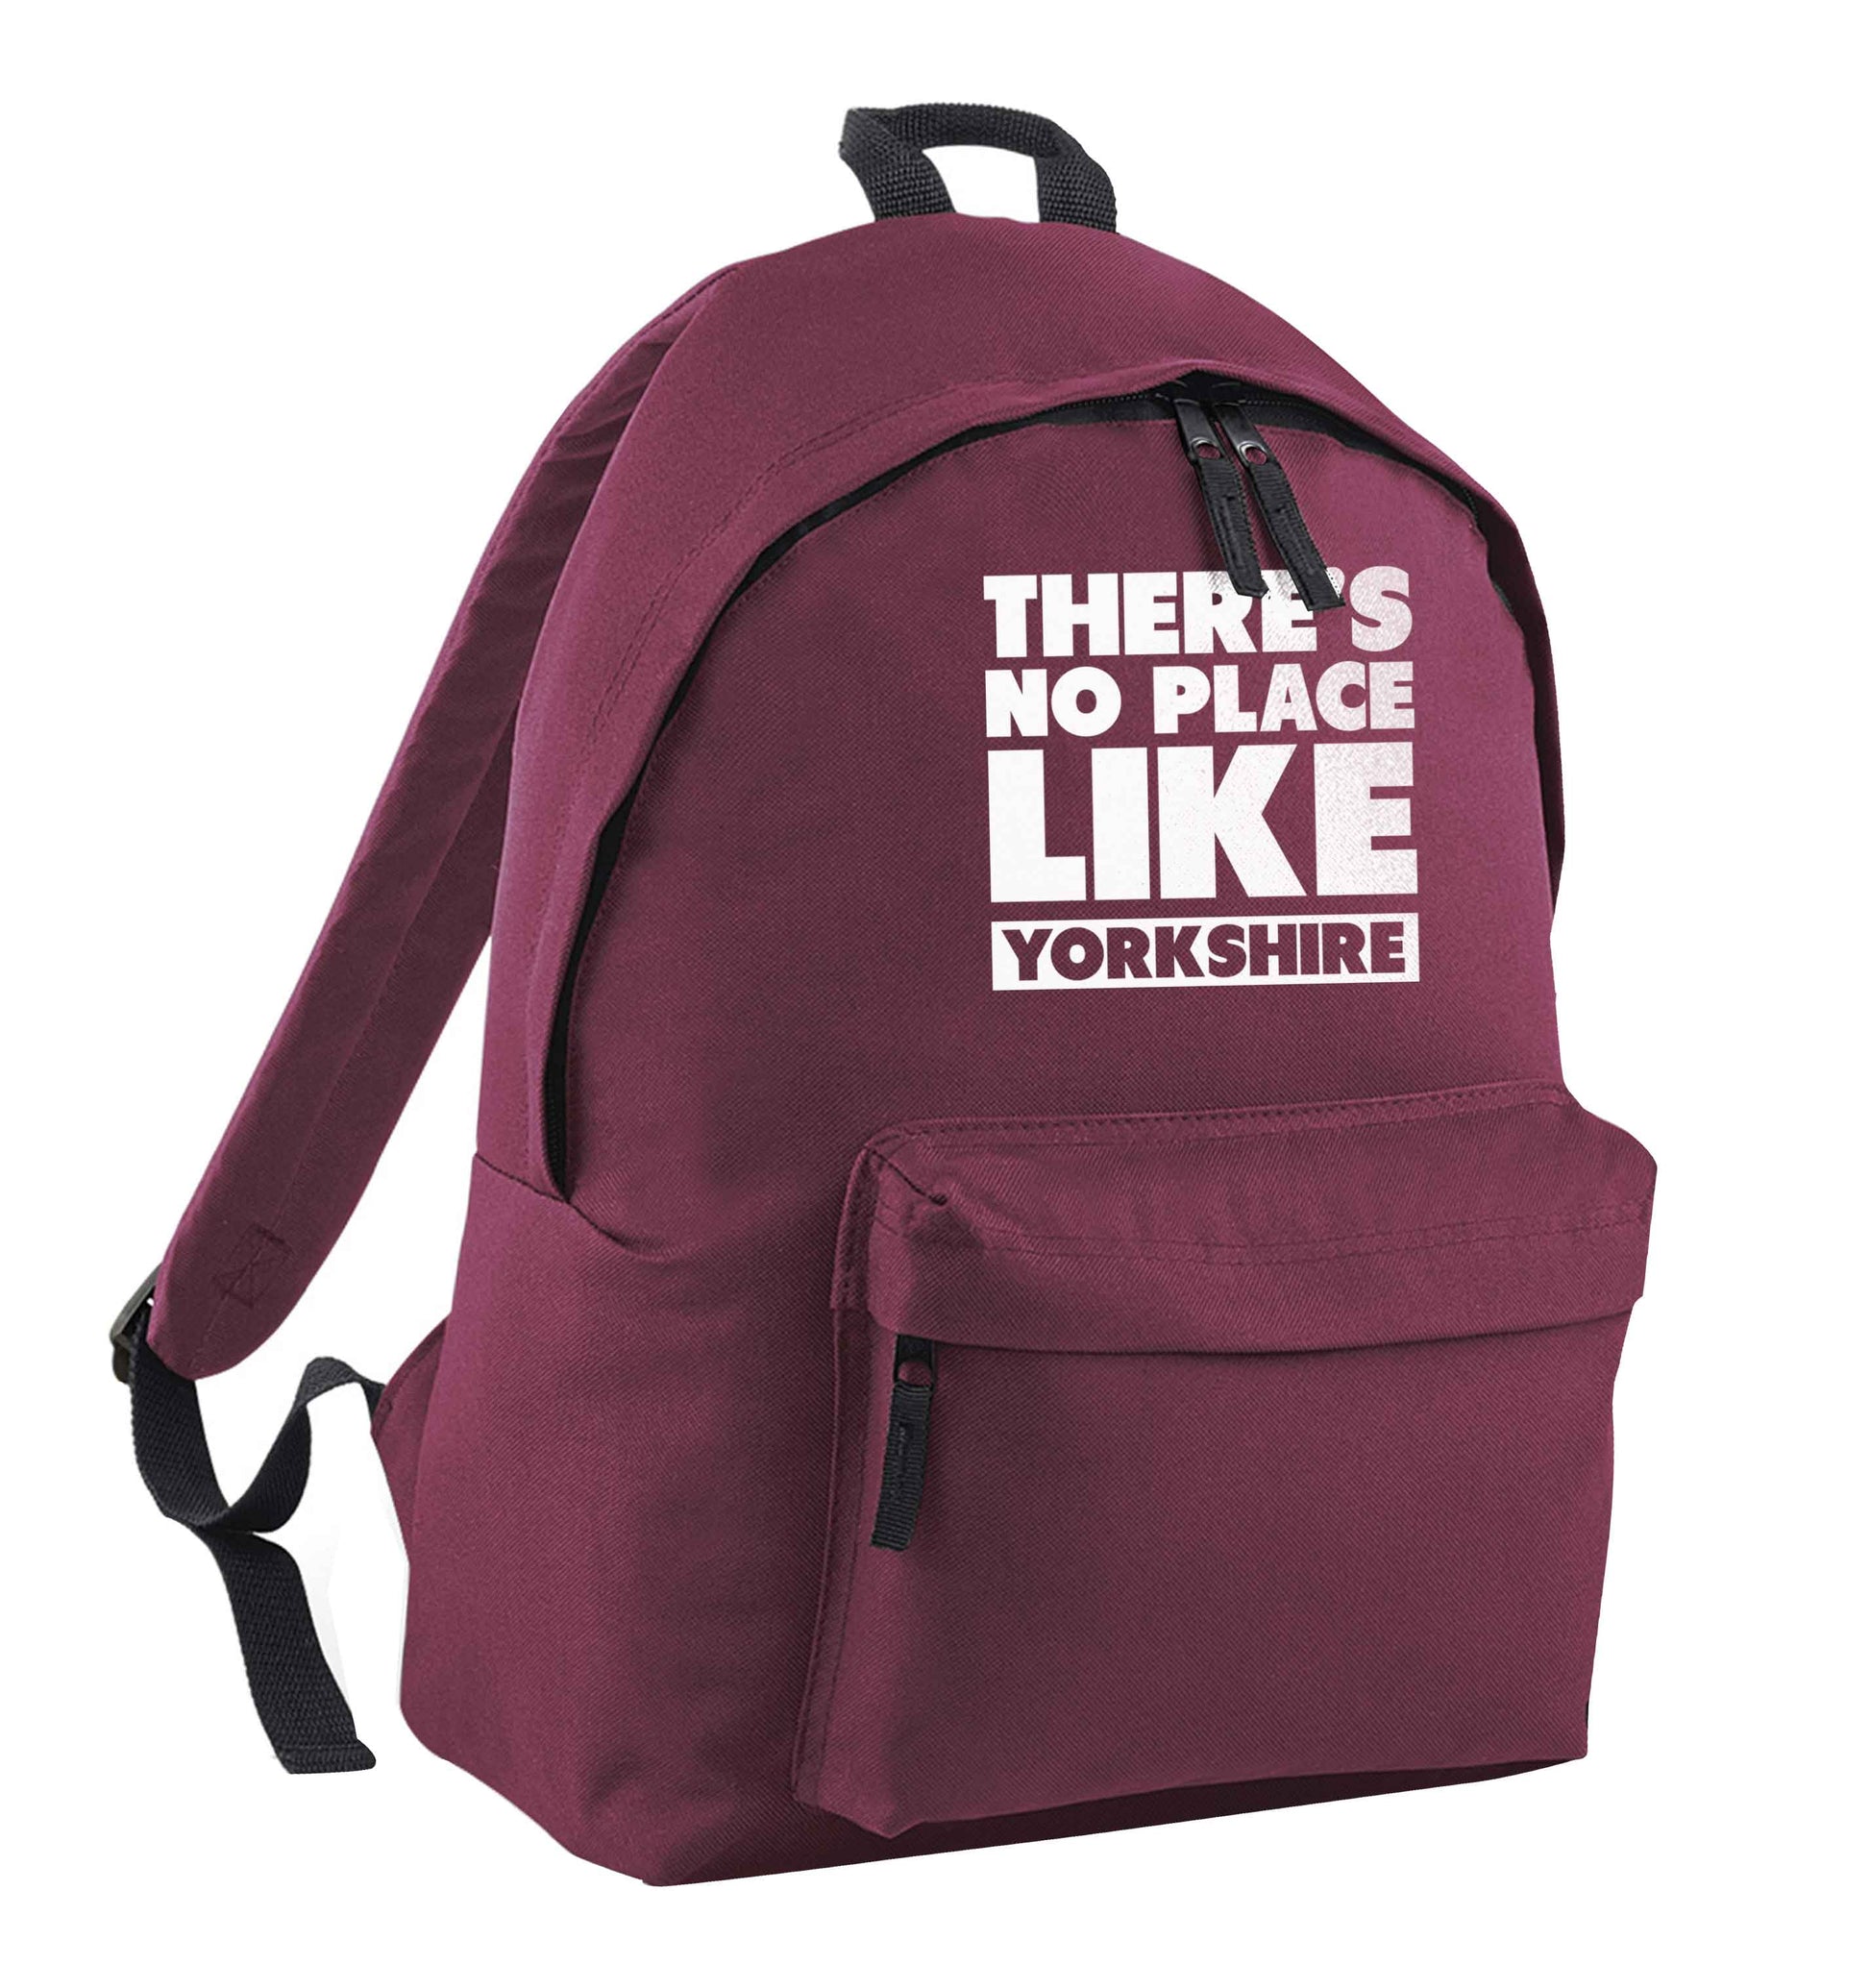 There's no place like Yorkshire maroon adults backpack